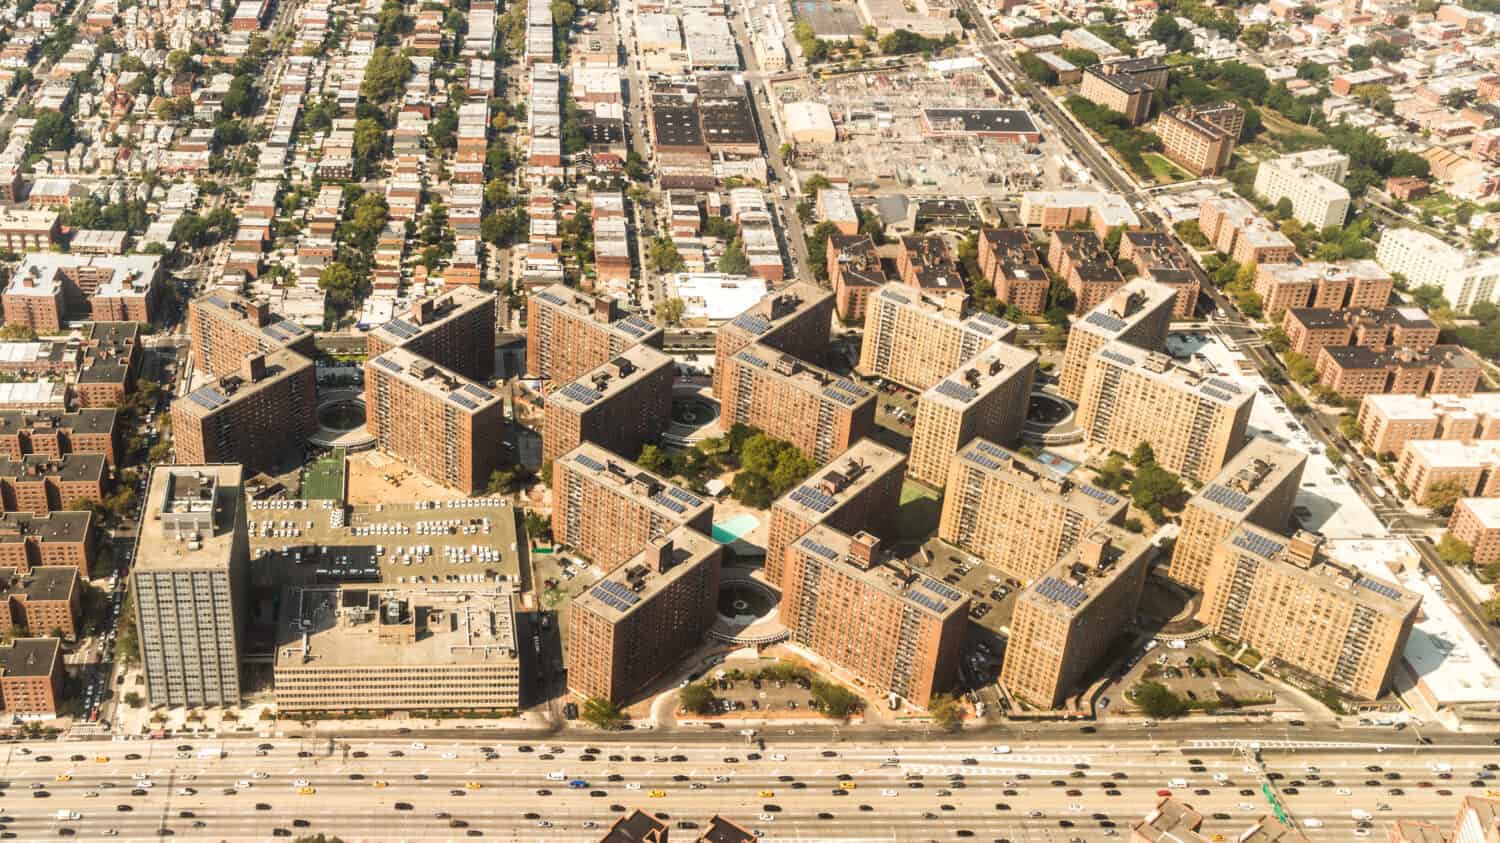 Aerial view of the Borough of Queens, New York, showing geometrically arranged and densely packed buildings and a multi-lane super highway